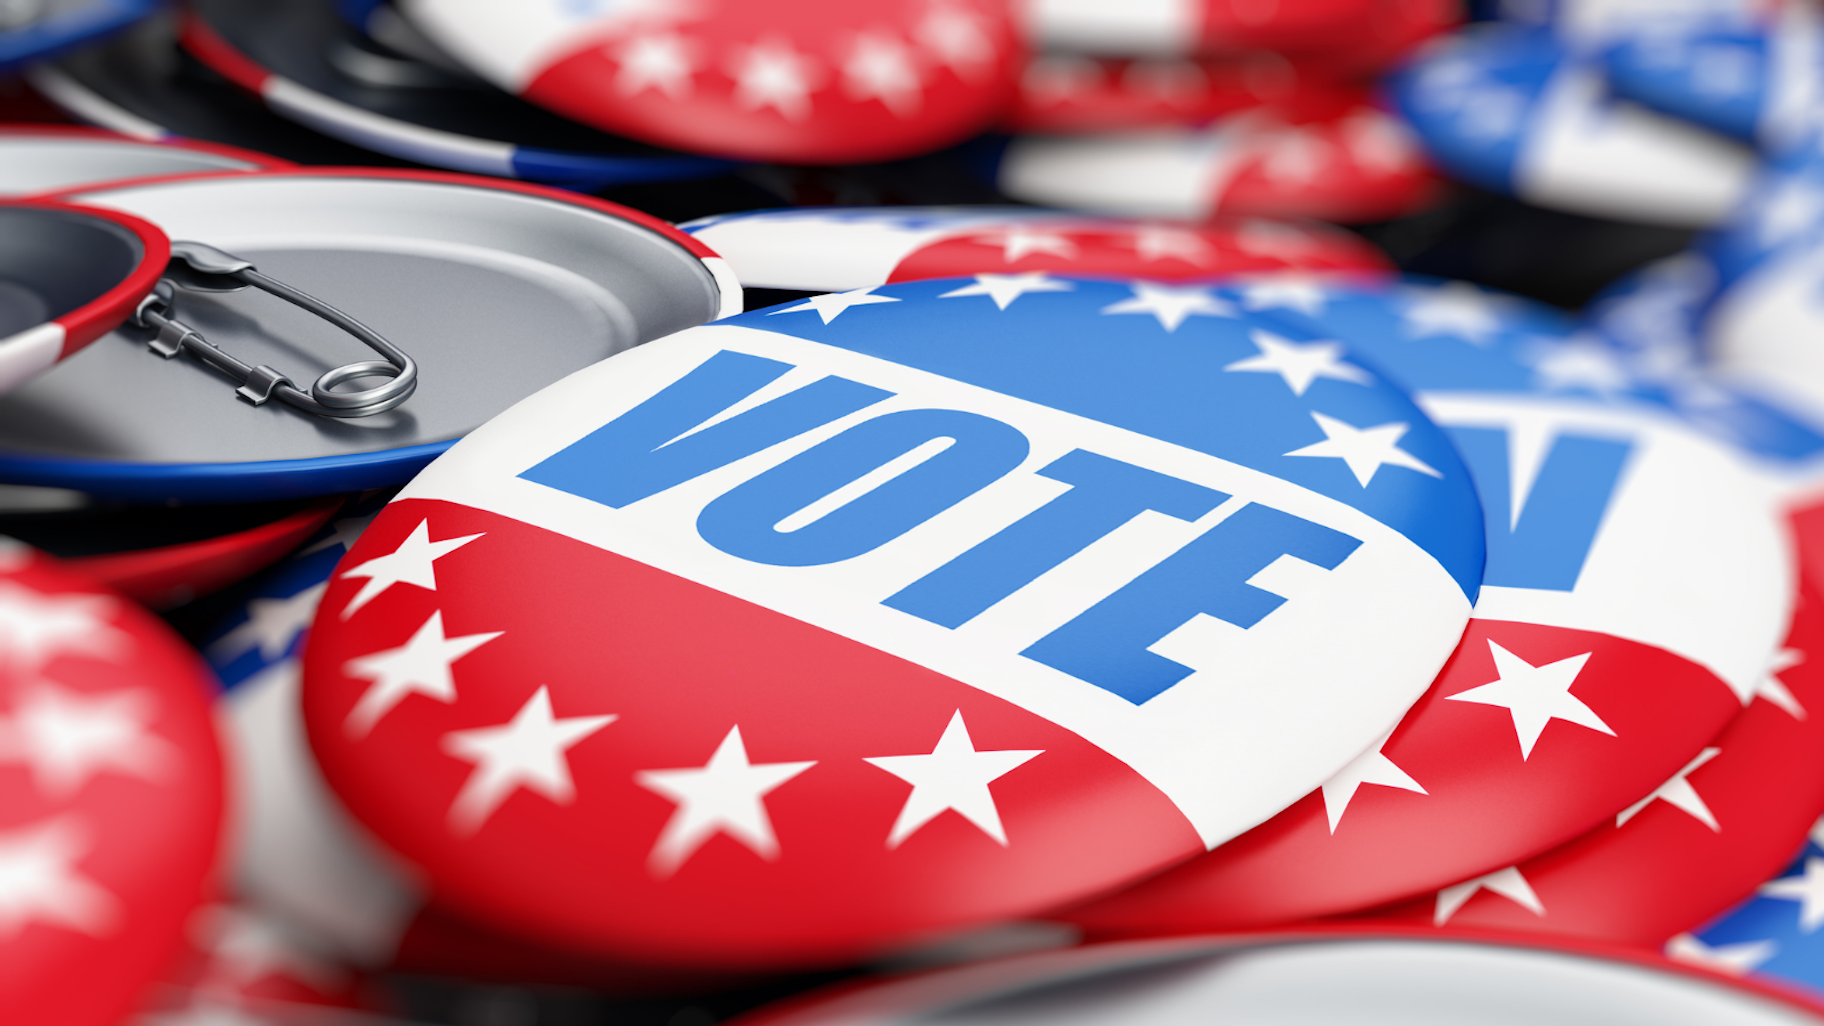 Top associations forge ‘Voting Maven’ to boost ad industry turnout for midterms